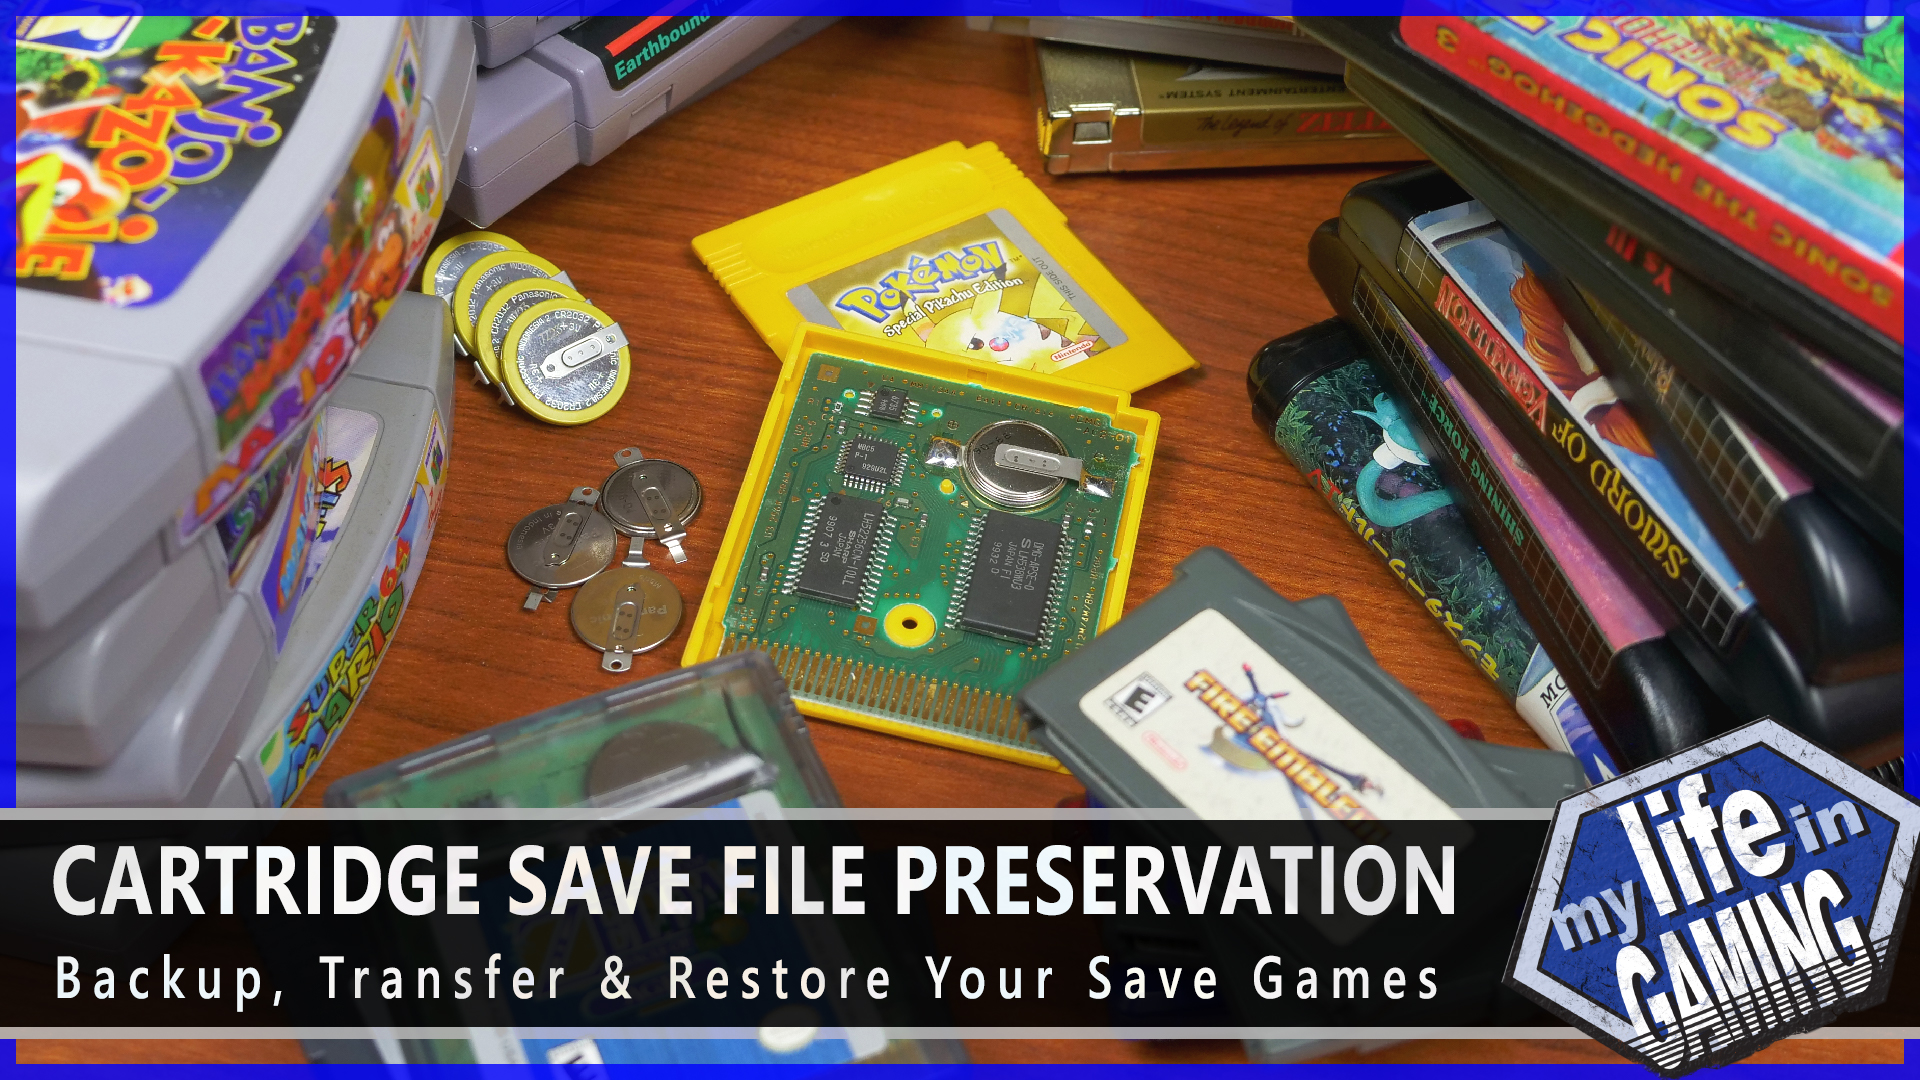 Cartridge Save File Preservation from My Life in Gaming